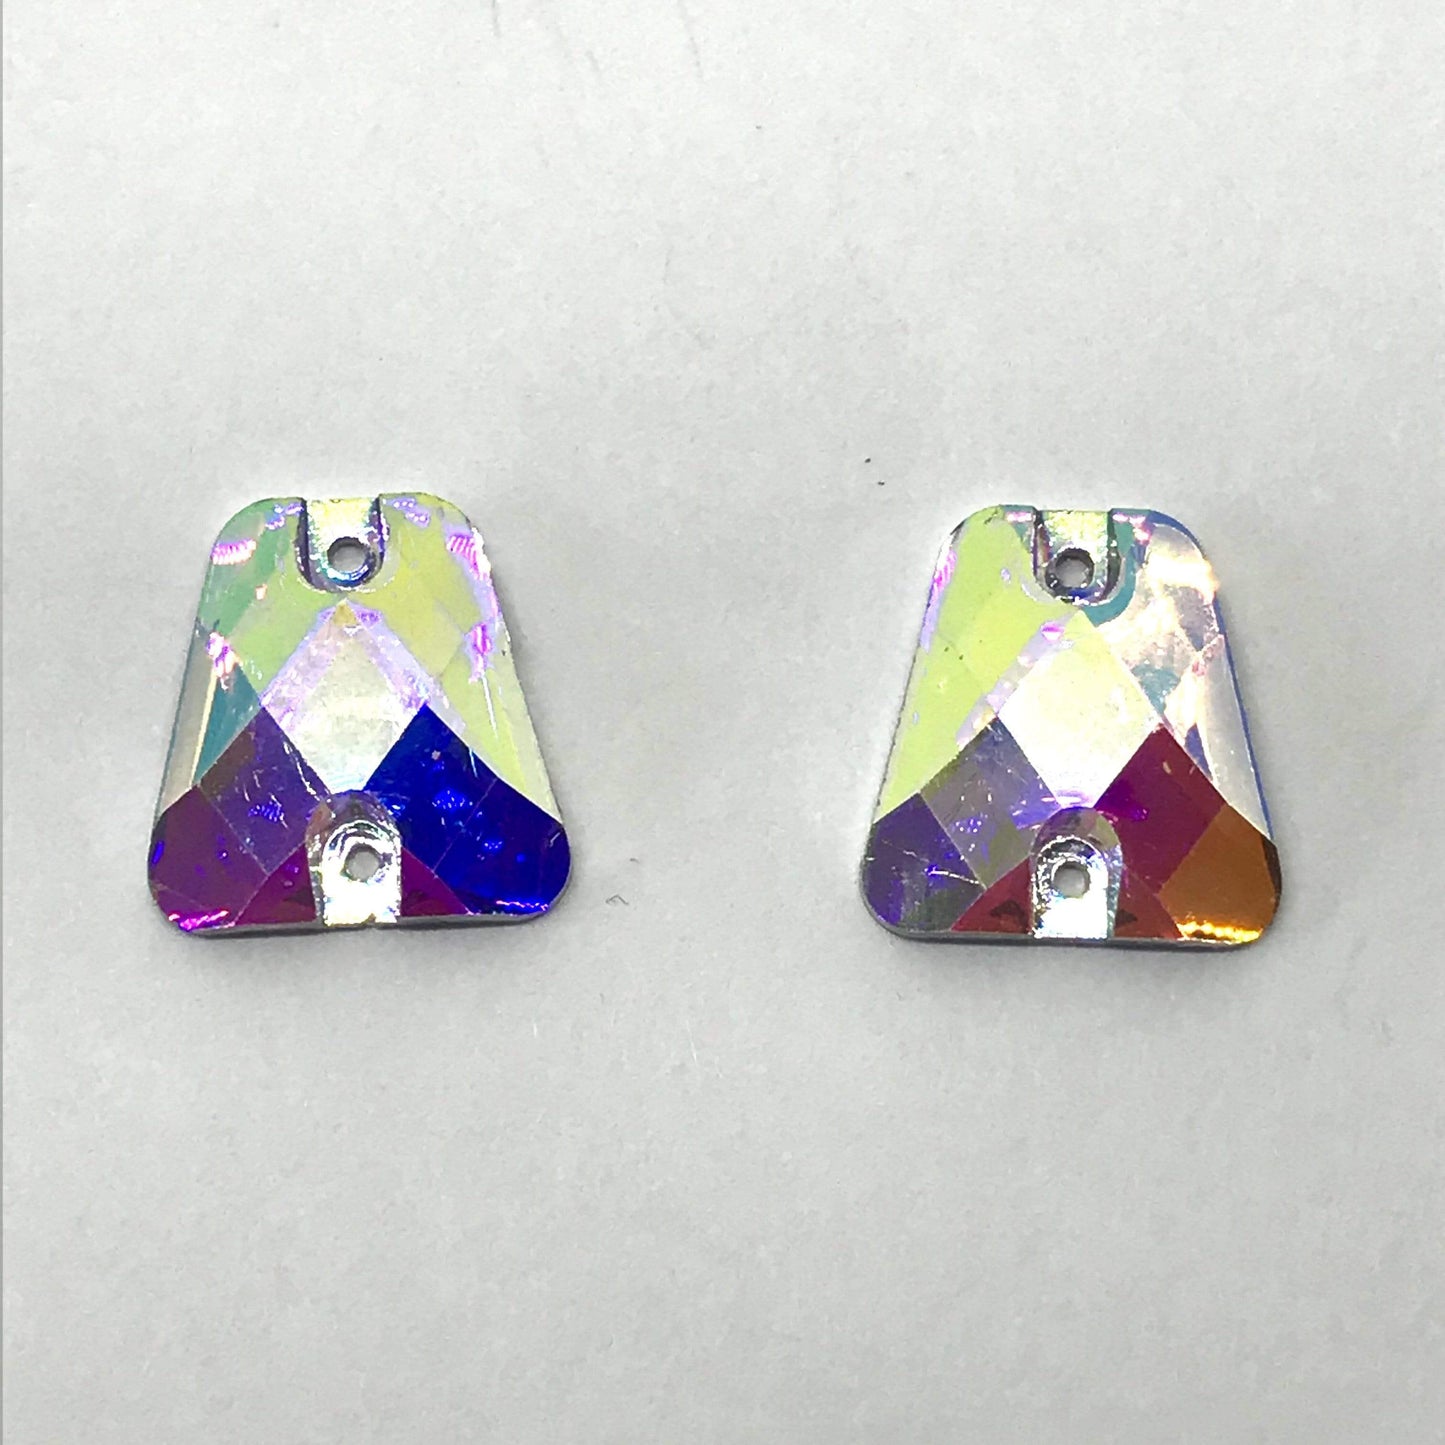 Sundaylace Creations & Bling Resin Gems 14mm Crystal AB Trapezoid Shaped Resin Gem, Sew on